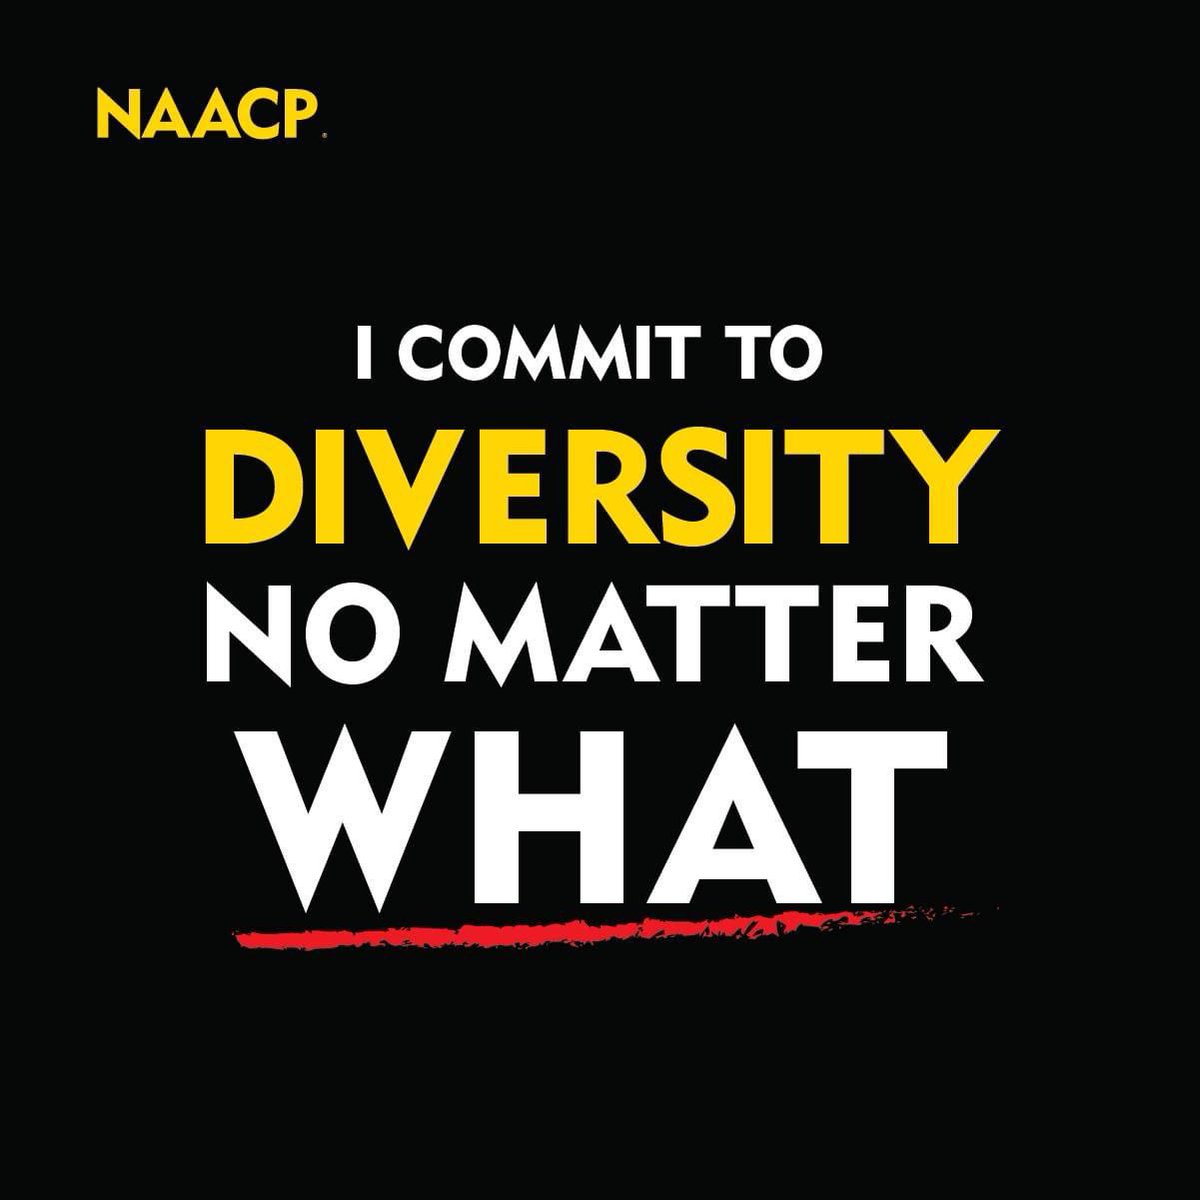 As we await the Supreme Court’s decision on affirmative action, we will continue to advocate for every Black American, to make sure our community has equal opportunity to #thrive. 

Are you committed to ensuring #DiversityNoMatterWhat